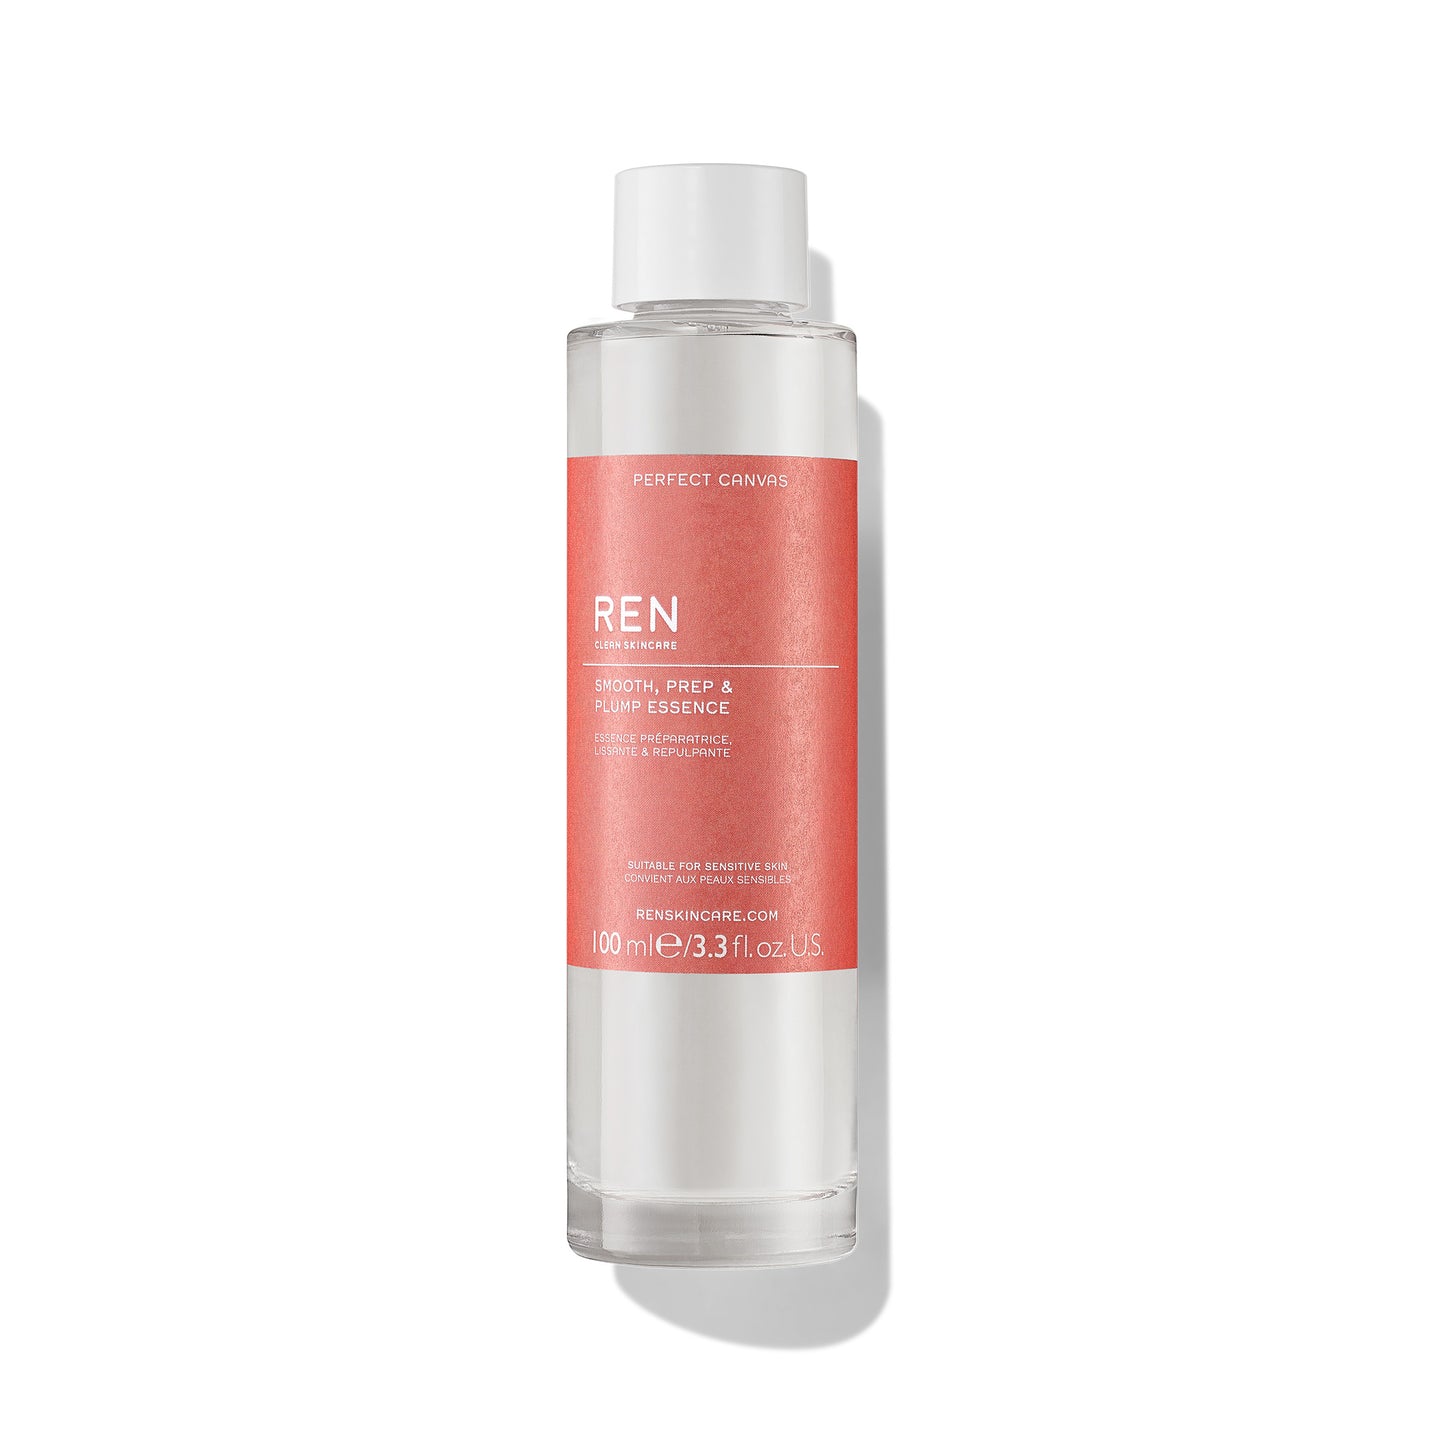 REN Perfect Canvas Smooth, Prep & Plump Essence | smooth skin barrier and protect | water based primer